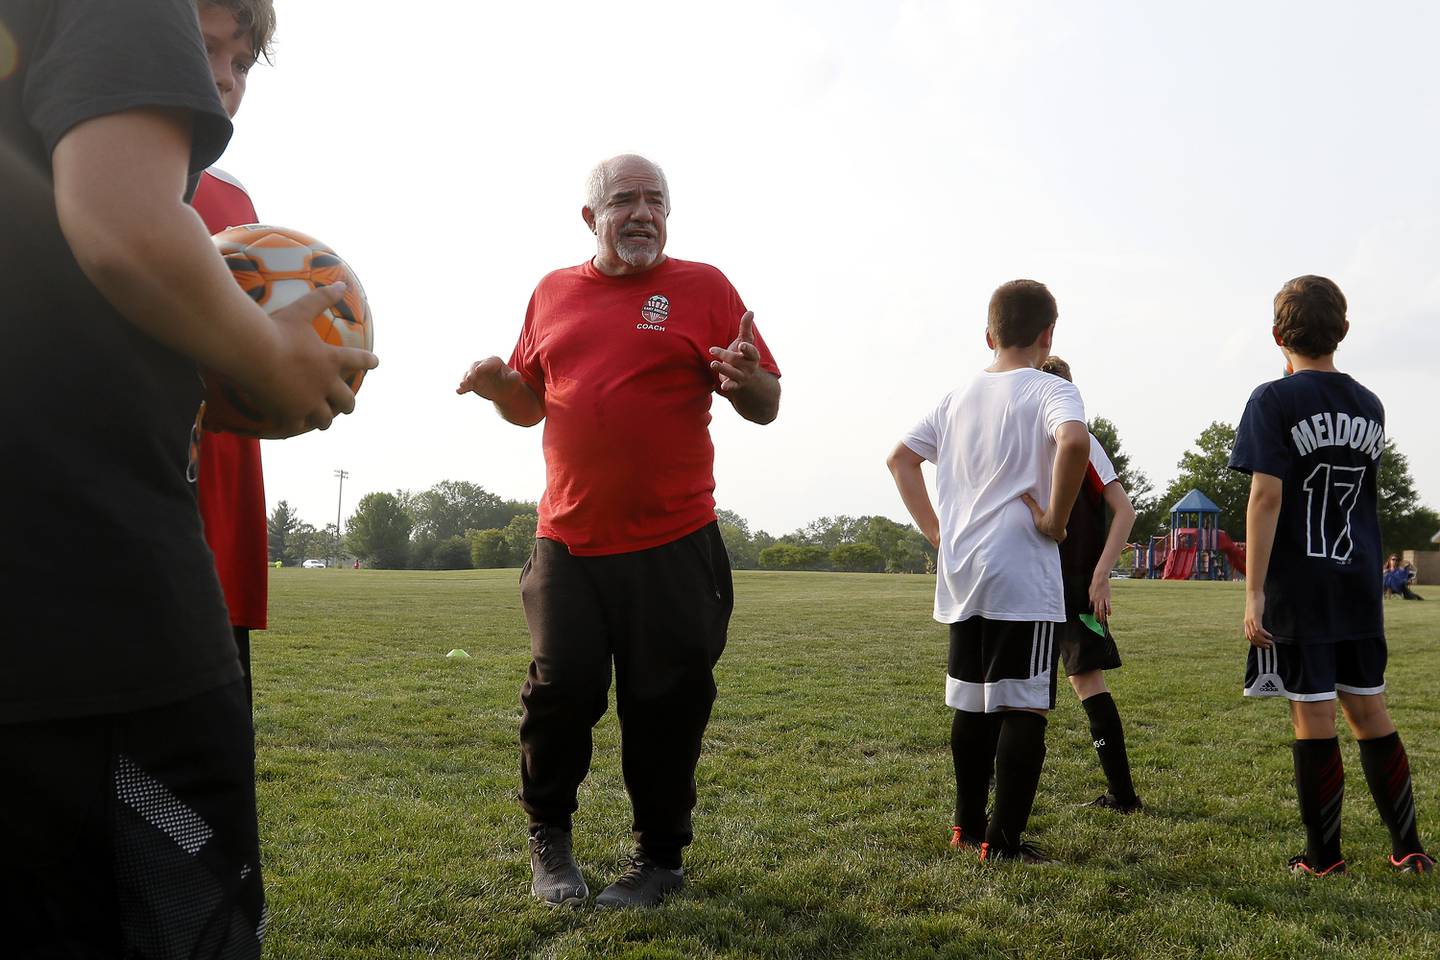 Cary Soccer Association coach Mike Goldman works with youth in the league at Cary Grove Park on Thursday, July 22, 2021 in Cary. Goldman, 70, is a recovered heroin addict from 45 years ago through Gateway who has focused his efforts into various volunteer opportunities, including coaching youth soccer.